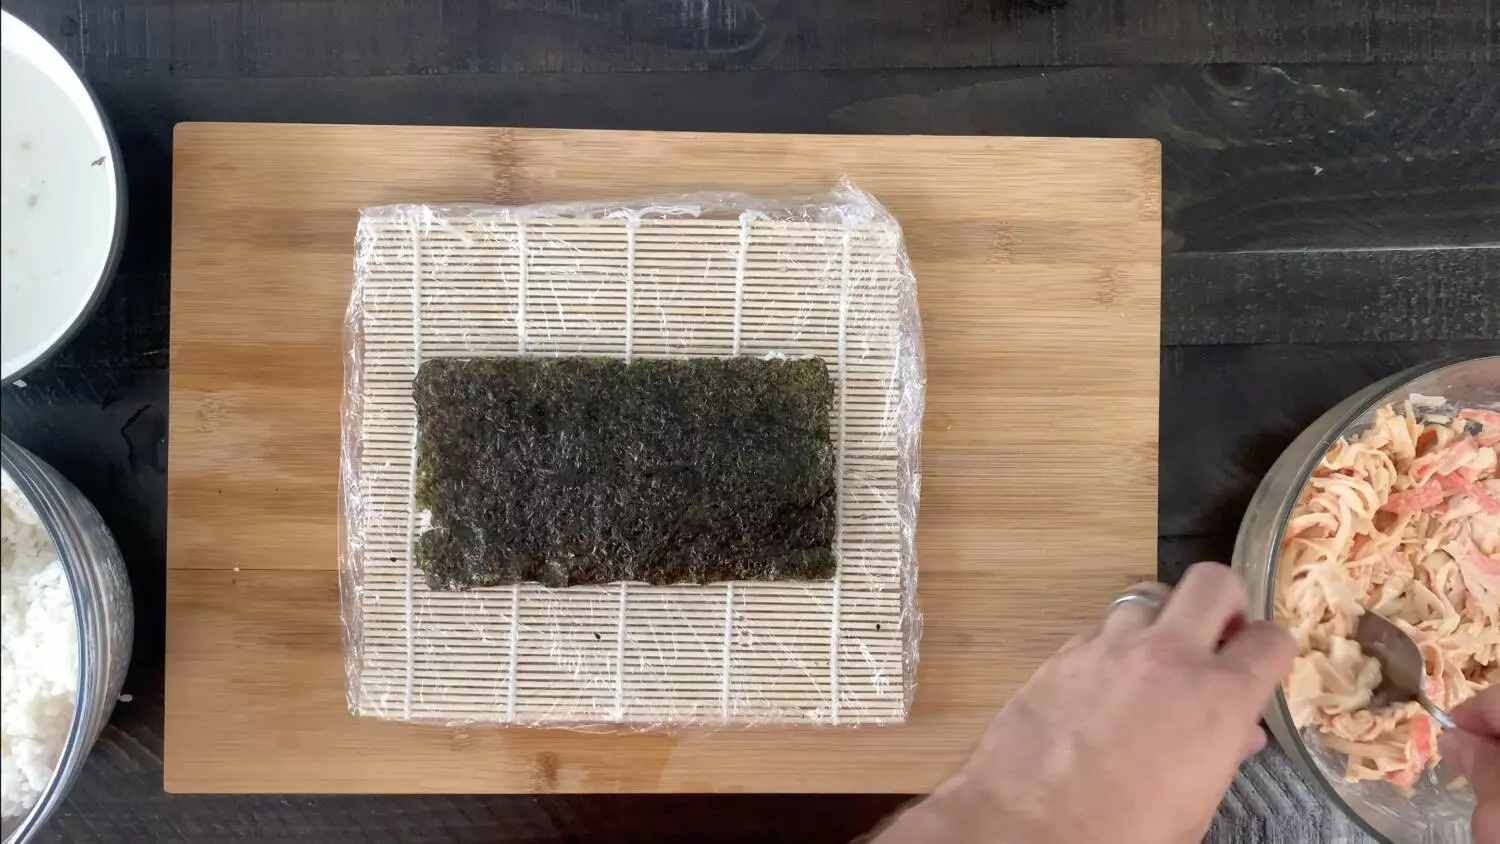 Flip the nori sheet for the spicy crab roll